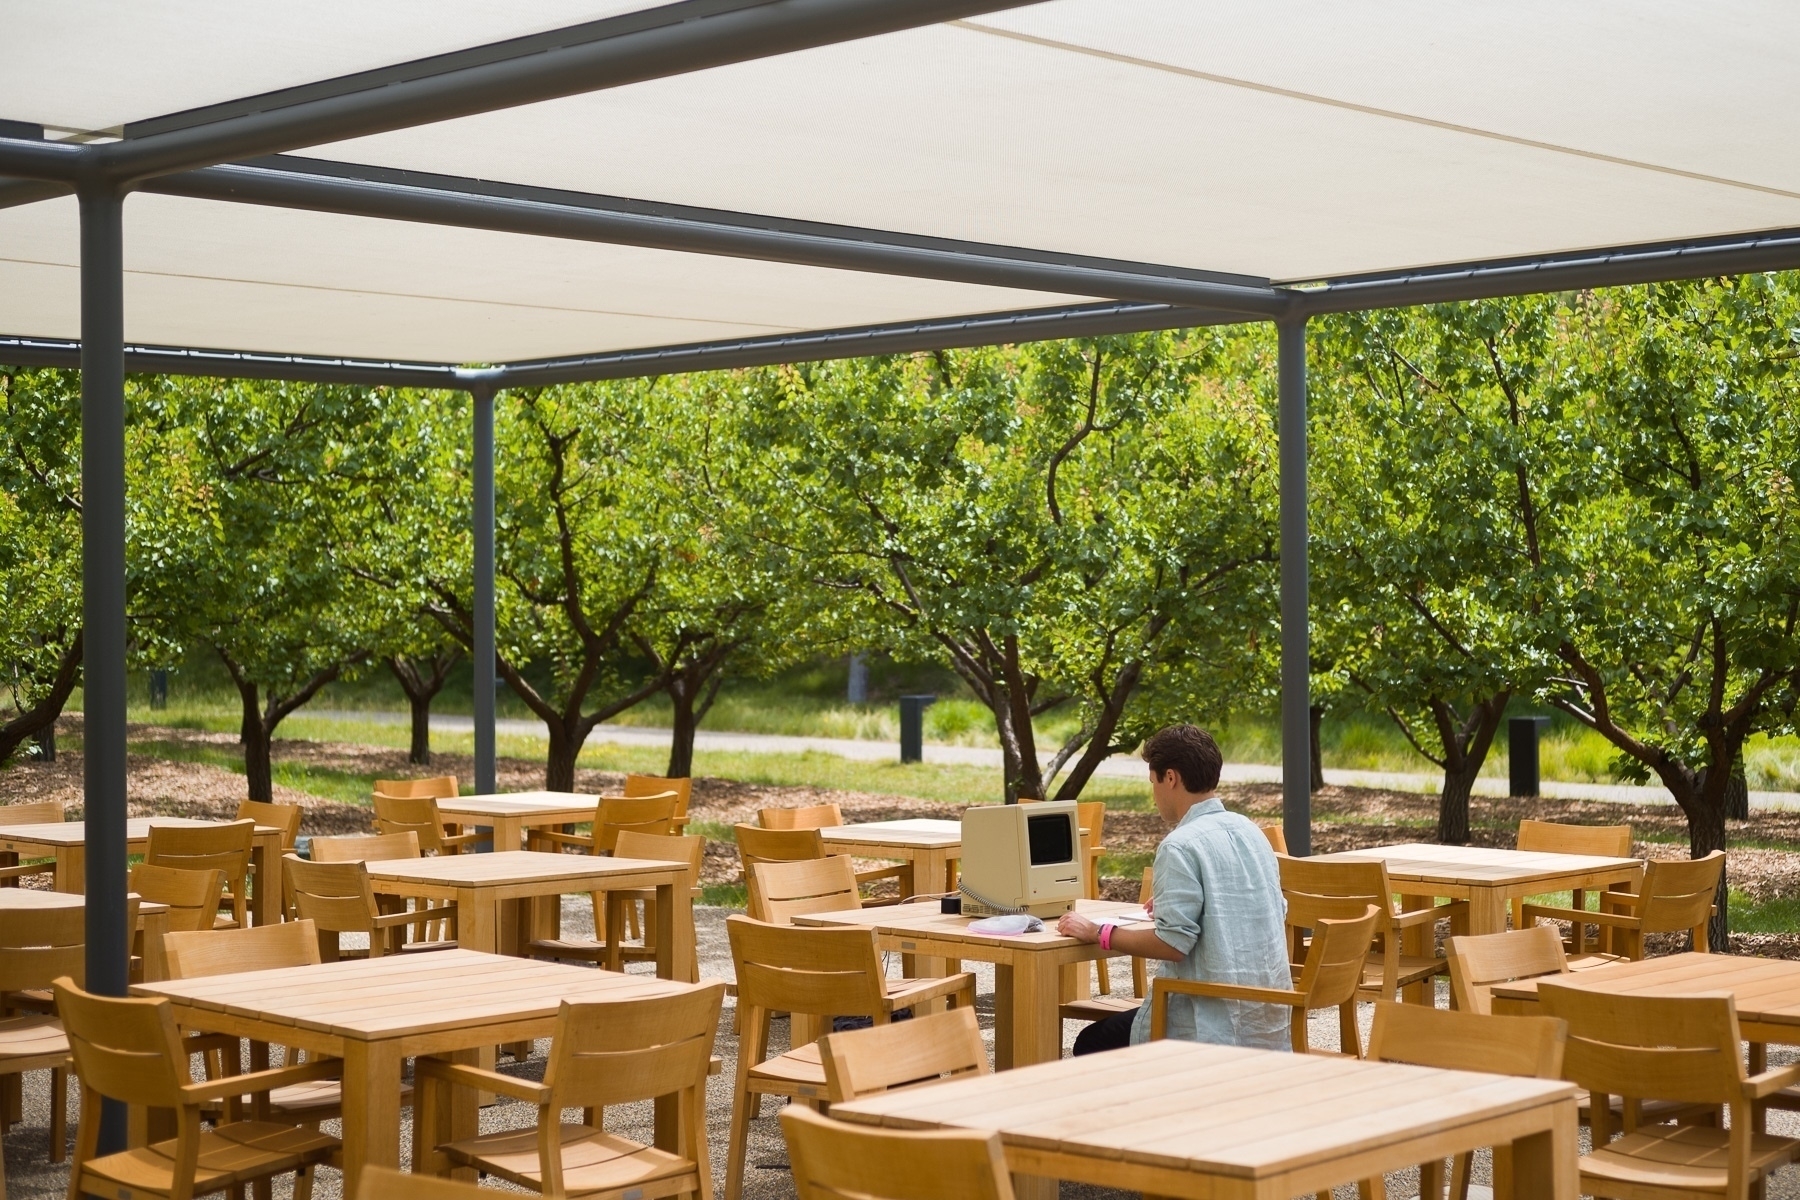 A young man is sitting at a table outdoors under a shade structure. He is using an Apple computer from thirty to forty years ago. He is surrounded by other similar tables which are all empty. In the background are a bunch of fruit trees.